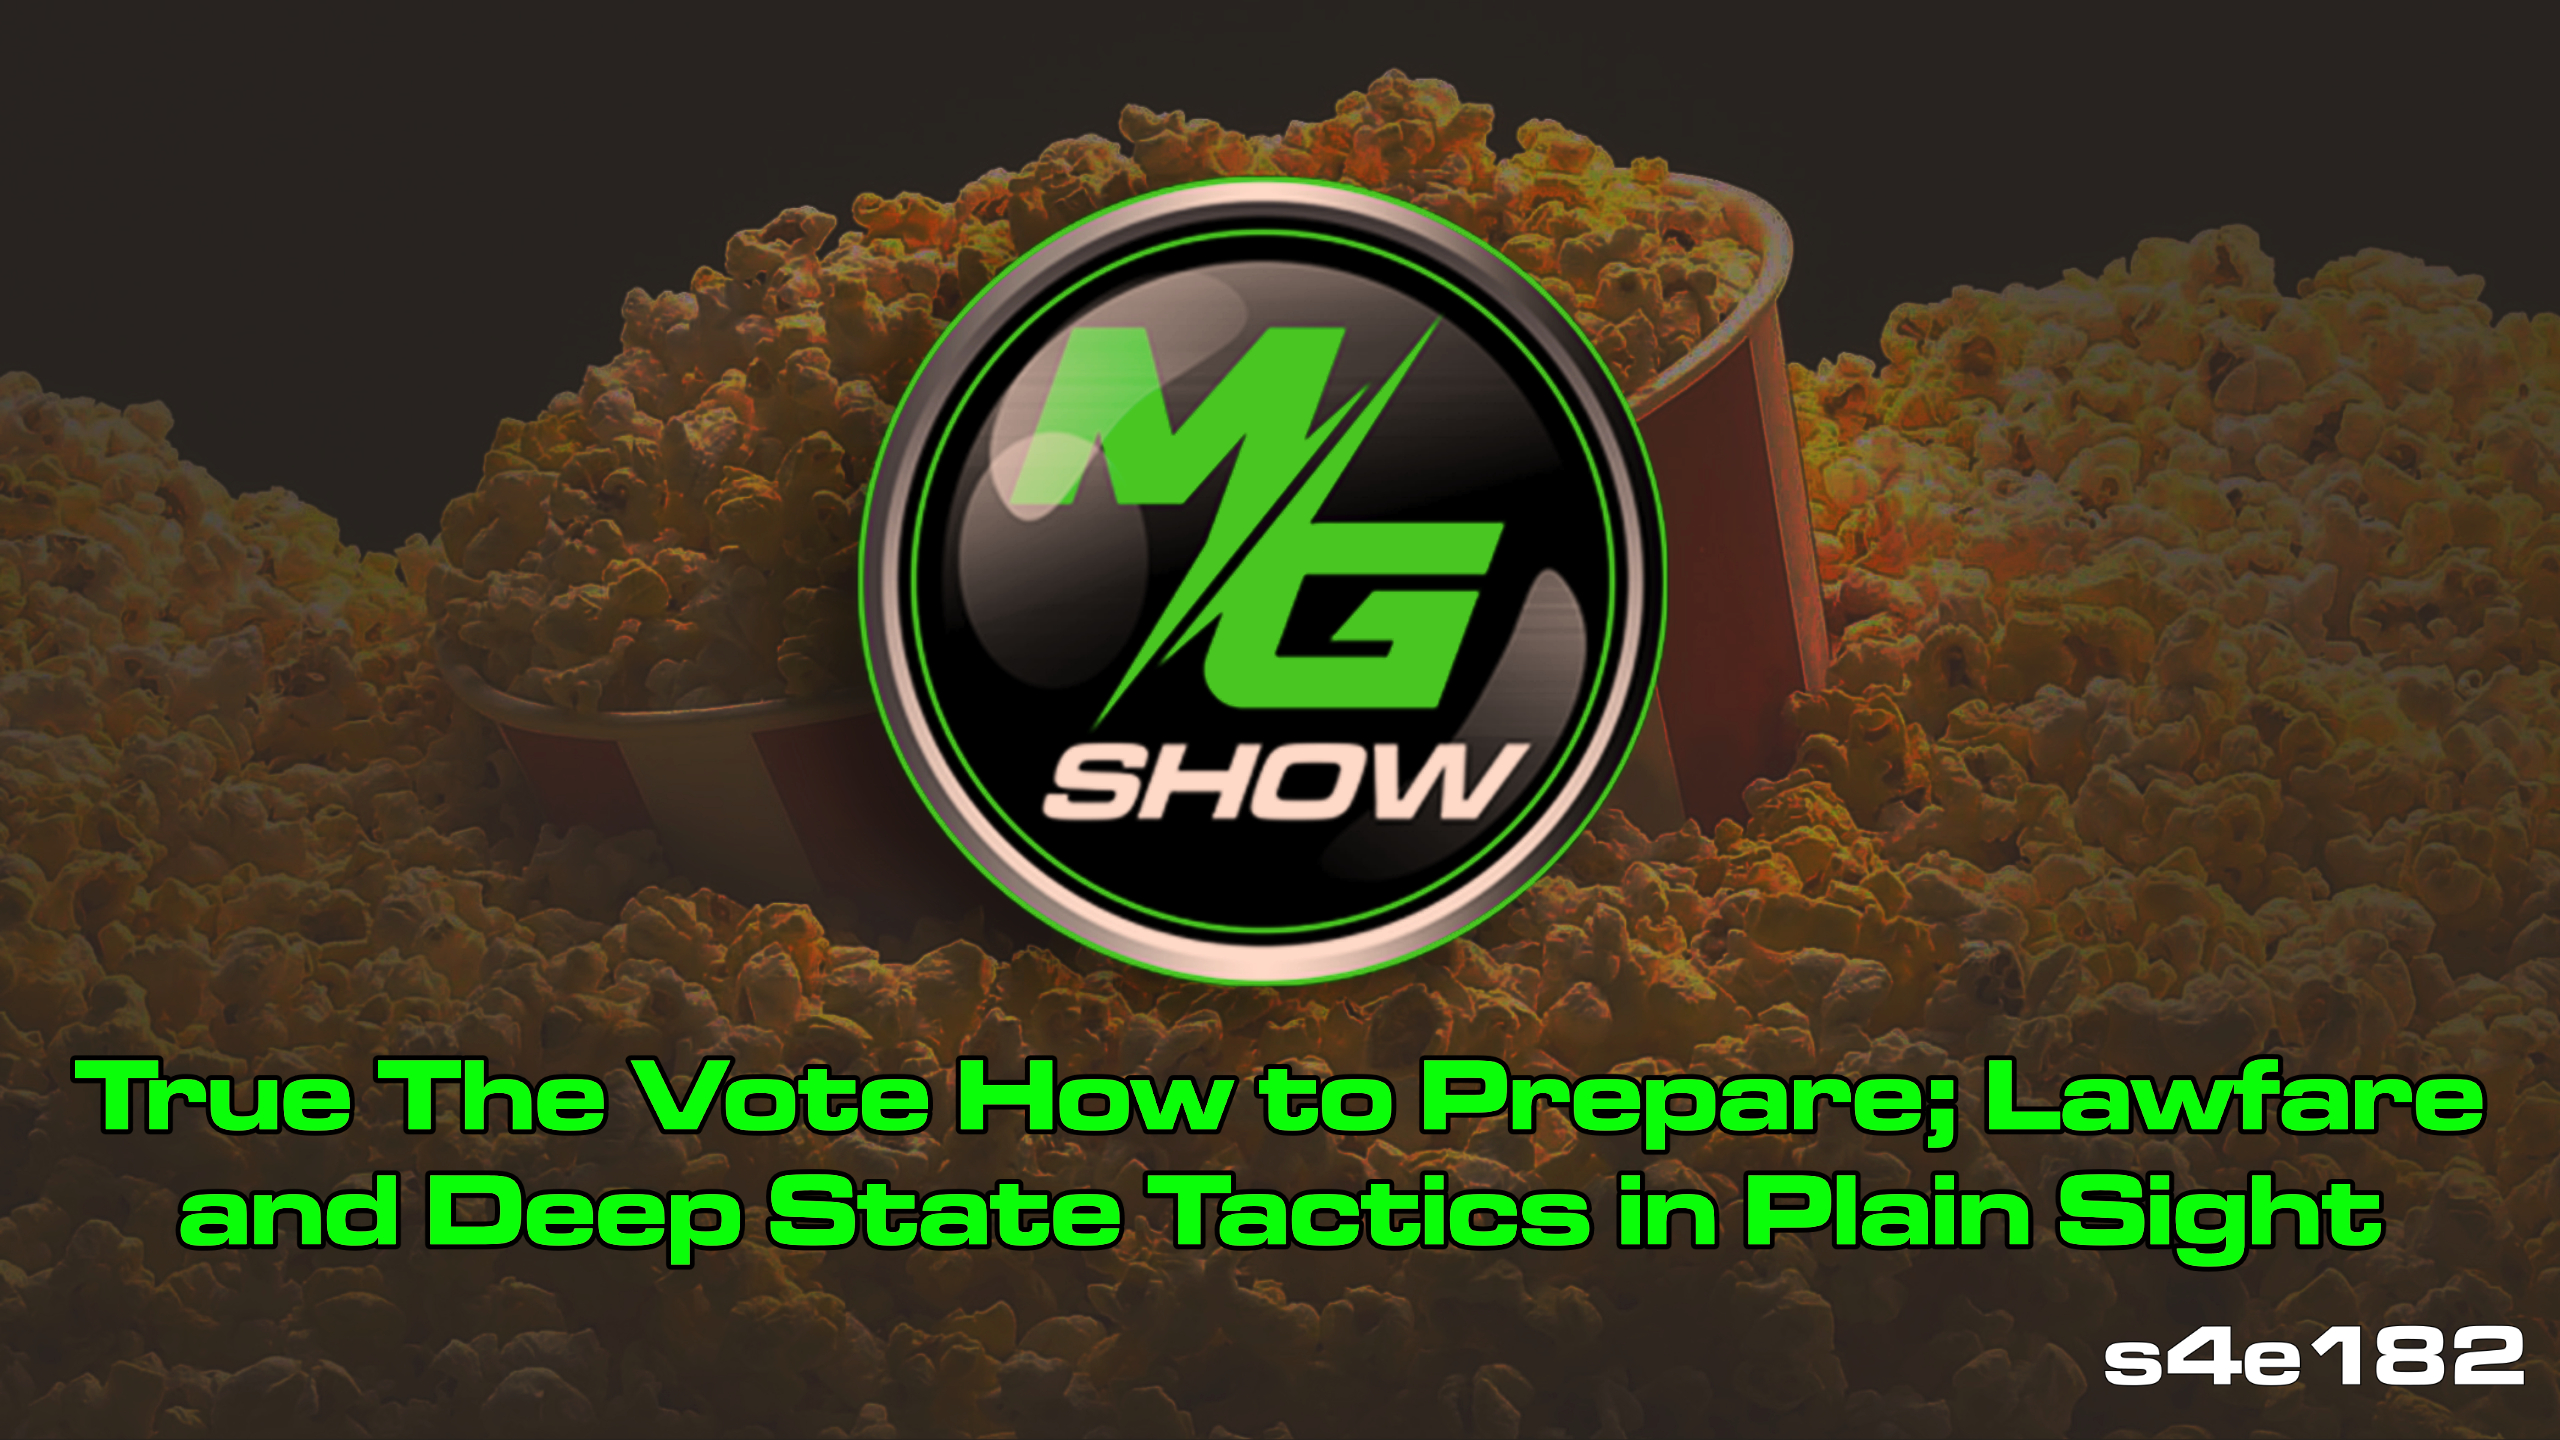 True The Vote How to Prepare; Lawfare and Deep State Tactics in Plain Sight